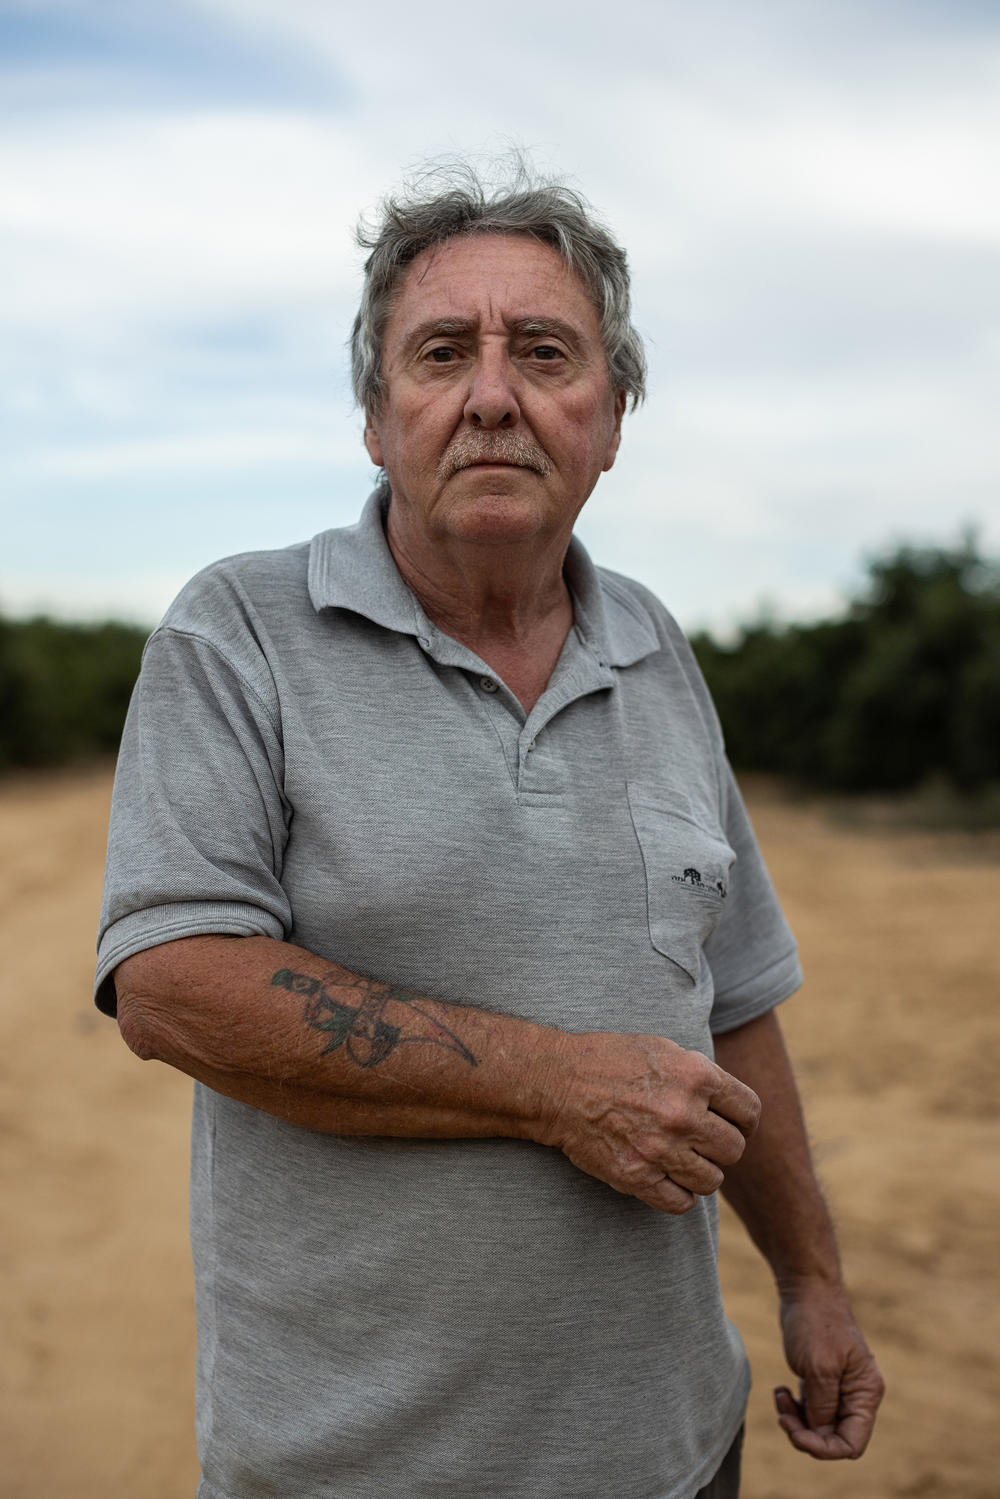 Paul Flynn typically supervises about 40 workers from Thailand on the avocado and citrus farm but many workers have left following the attacks on Oct. 7.